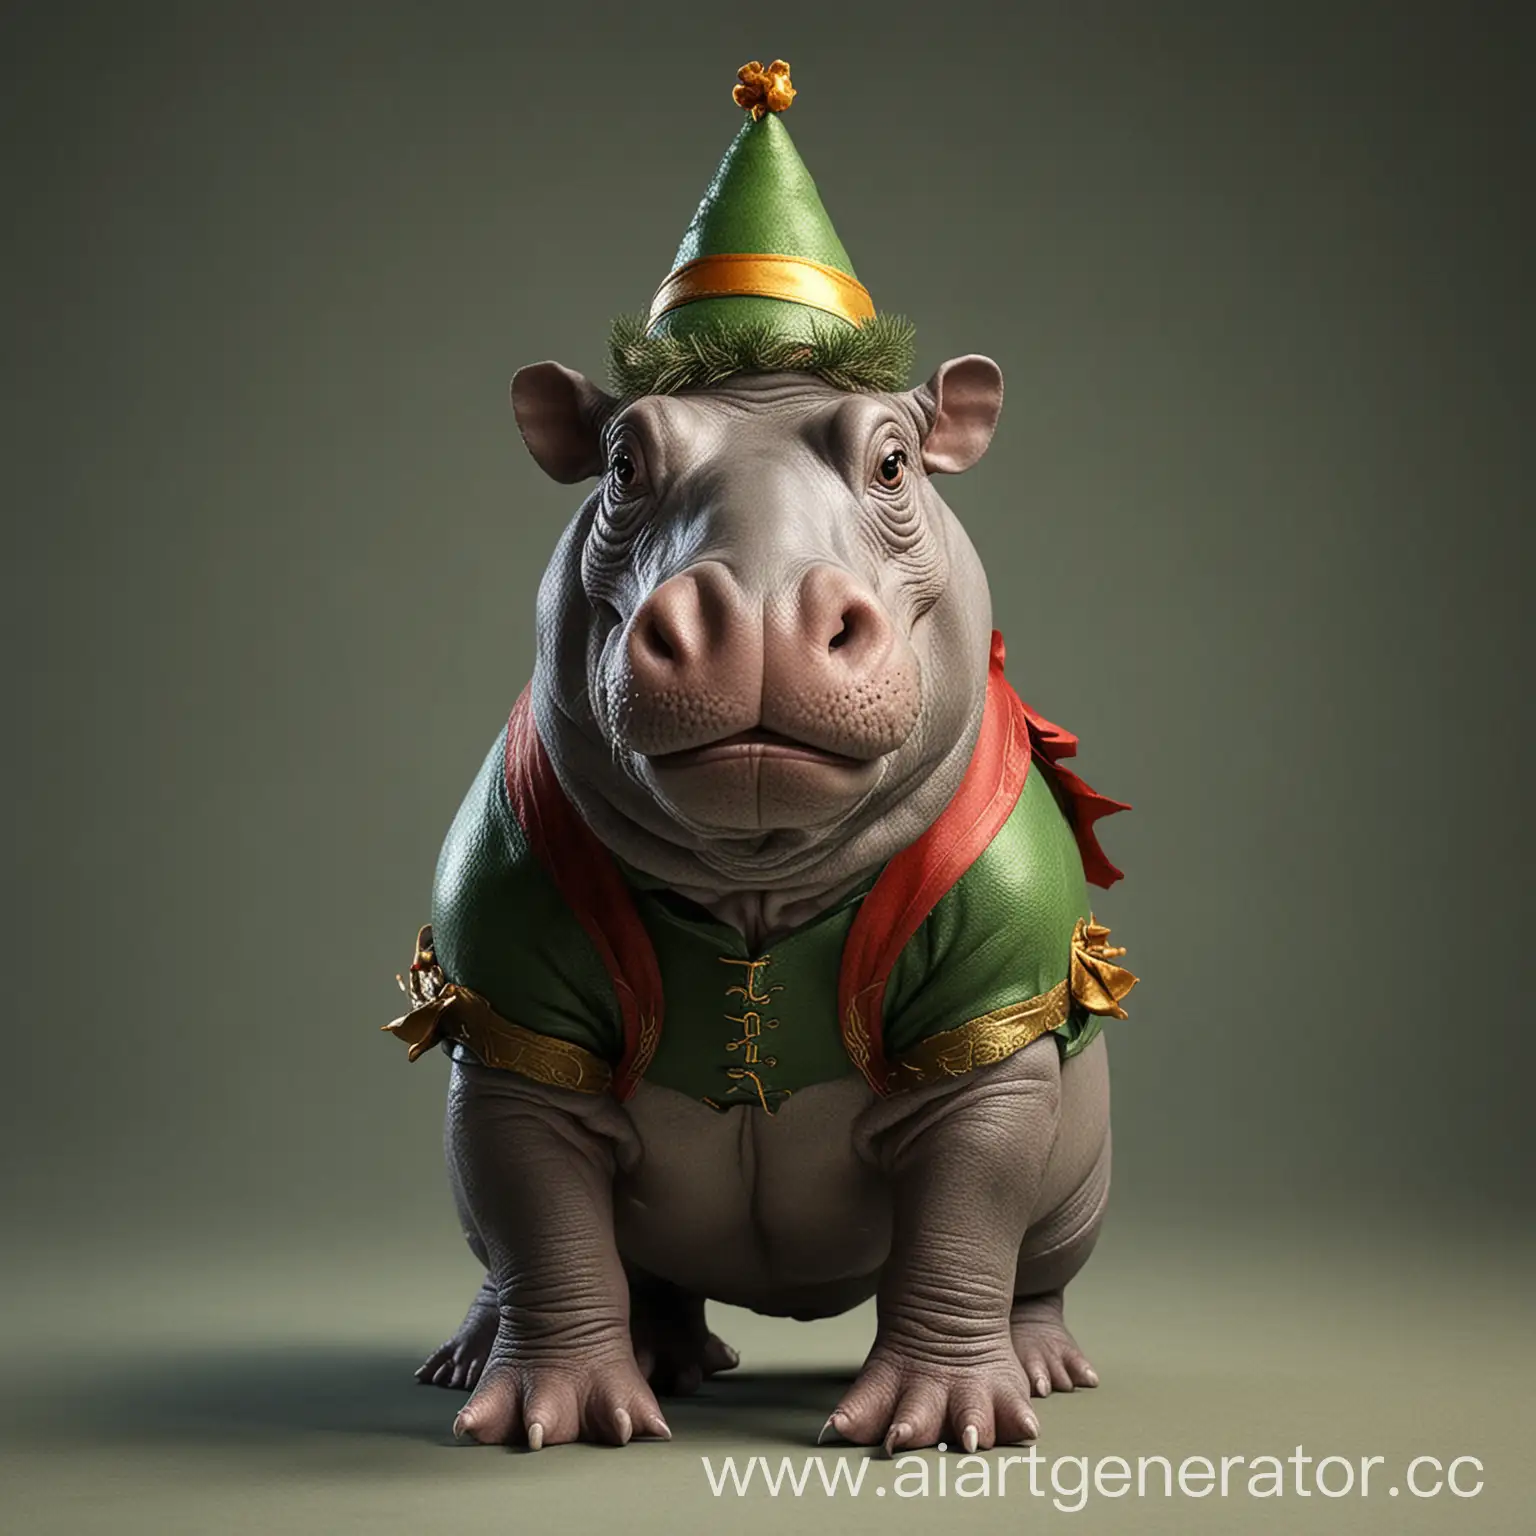 Create an image of a hippopotamus in the form of an elf. 